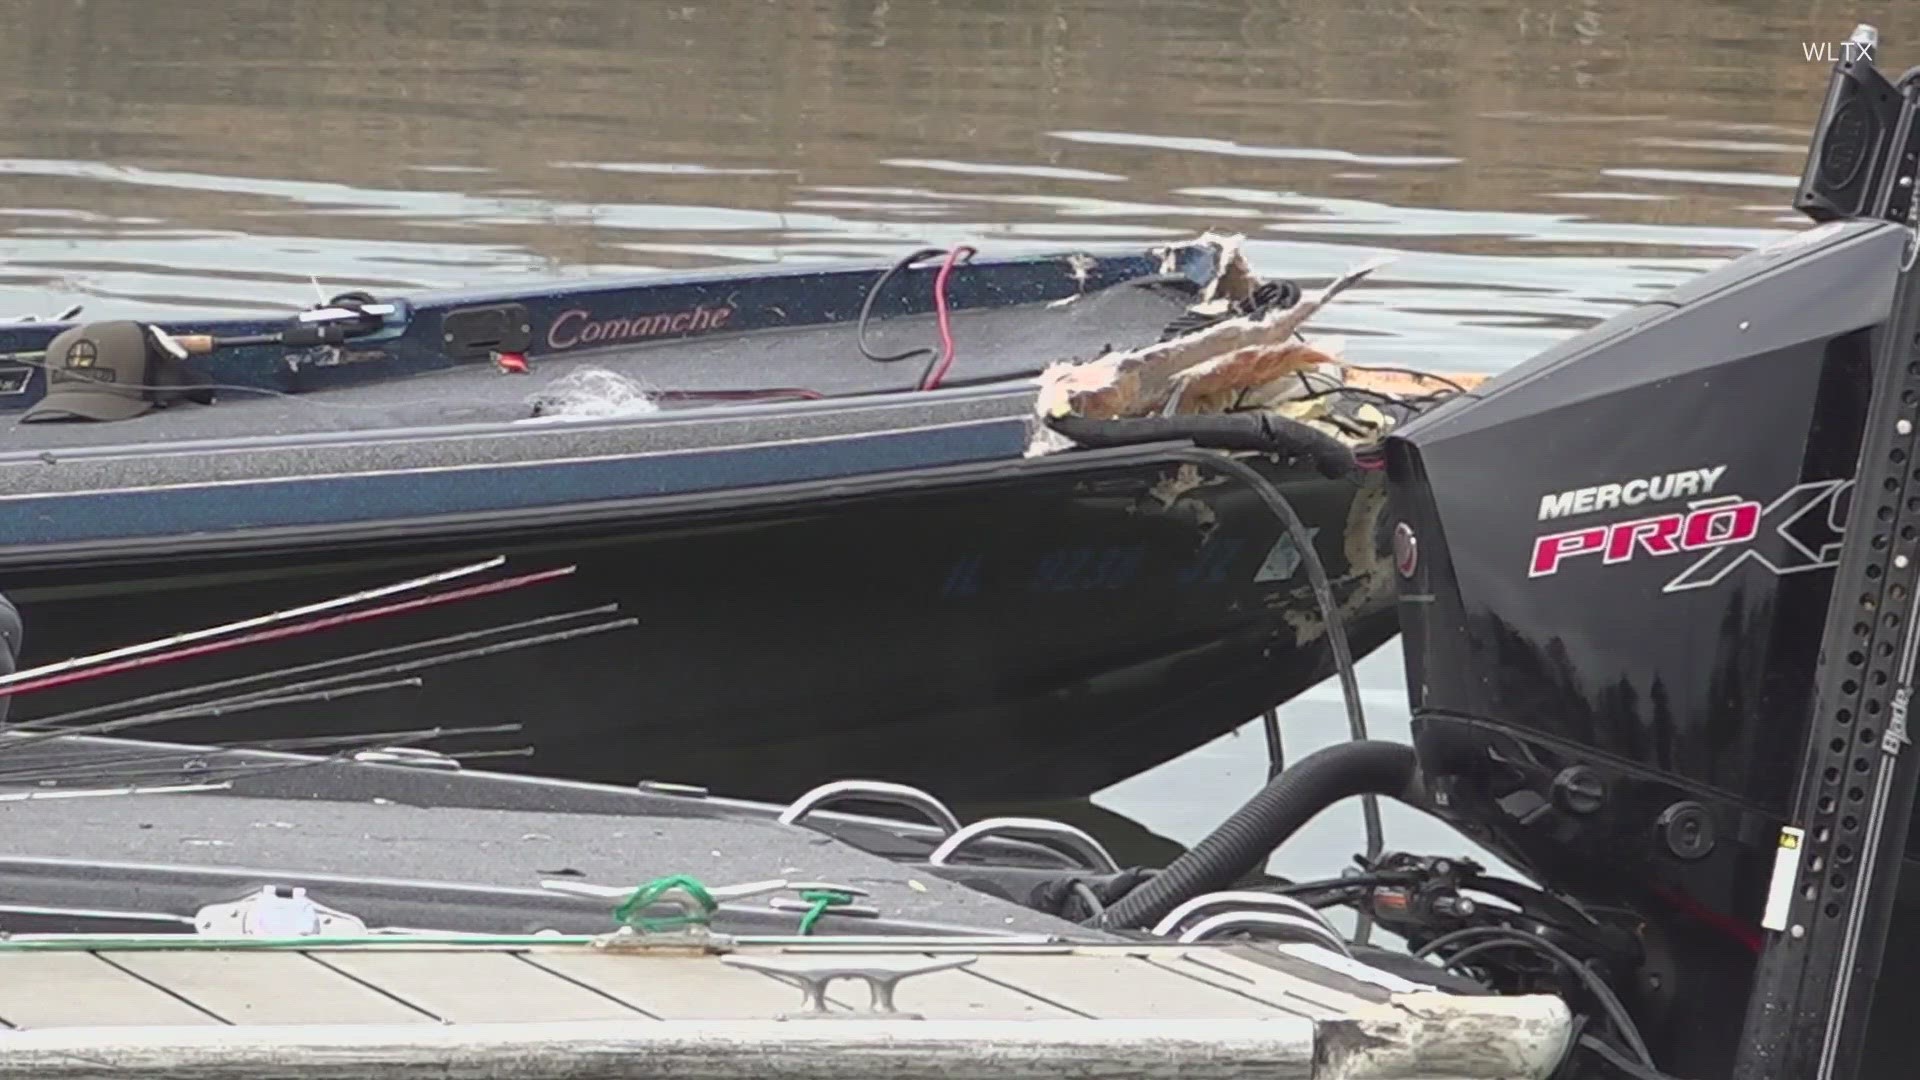 Jonathan Brian of Western Kentucky University, was one of the occupants of a boat that collided with another during a Bassmasters fishing tournament.